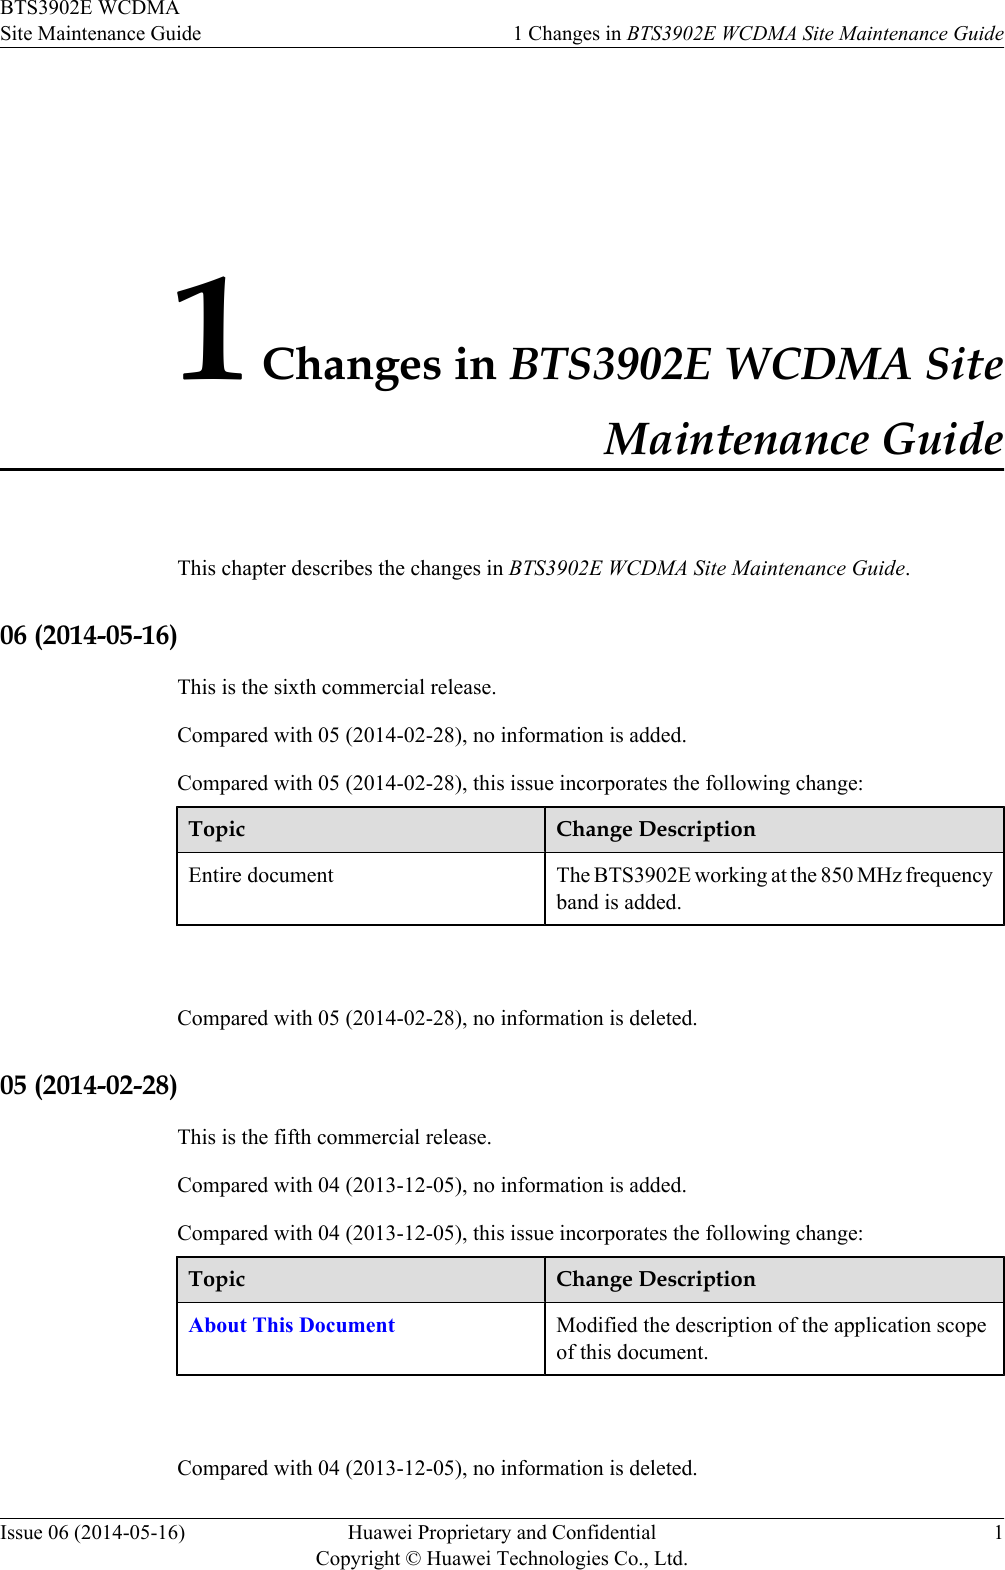 1 Changes in BTS3902E WCDMA SiteMaintenance GuideThis chapter describes the changes in BTS3902E WCDMA Site Maintenance Guide.06 (2014-05-16)This is the sixth commercial release.Compared with 05 (2014-02-28), no information is added.Compared with 05 (2014-02-28), this issue incorporates the following change:Topic Change DescriptionEntire document The BTS3902E working at the 850 MHz frequencyband is added. Compared with 05 (2014-02-28), no information is deleted.05 (2014-02-28)This is the fifth commercial release.Compared with 04 (2013-12-05), no information is added.Compared with 04 (2013-12-05), this issue incorporates the following change:Topic Change DescriptionAbout This Document Modified the description of the application scopeof this document. Compared with 04 (2013-12-05), no information is deleted.BTS3902E WCDMASite Maintenance Guide 1 Changes in BTS3902E WCDMA Site Maintenance GuideIssue 06 (2014-05-16) Huawei Proprietary and ConfidentialCopyright © Huawei Technologies Co., Ltd.1